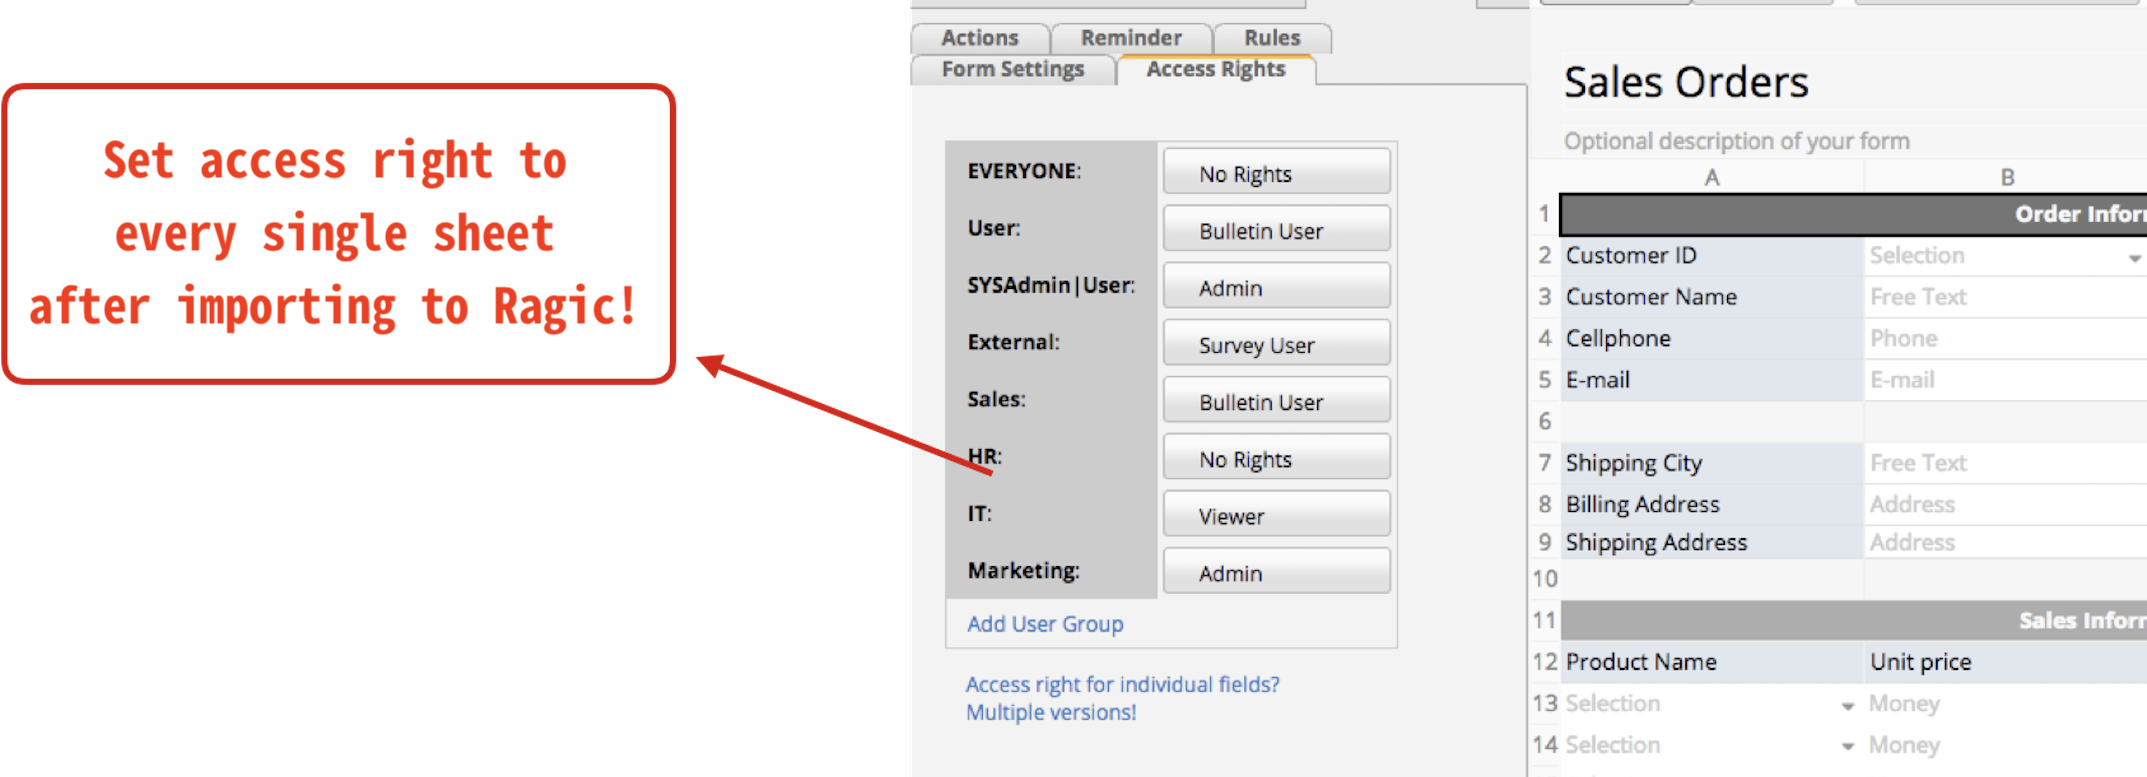 Set access right to every single sheet after importing to Ragic!